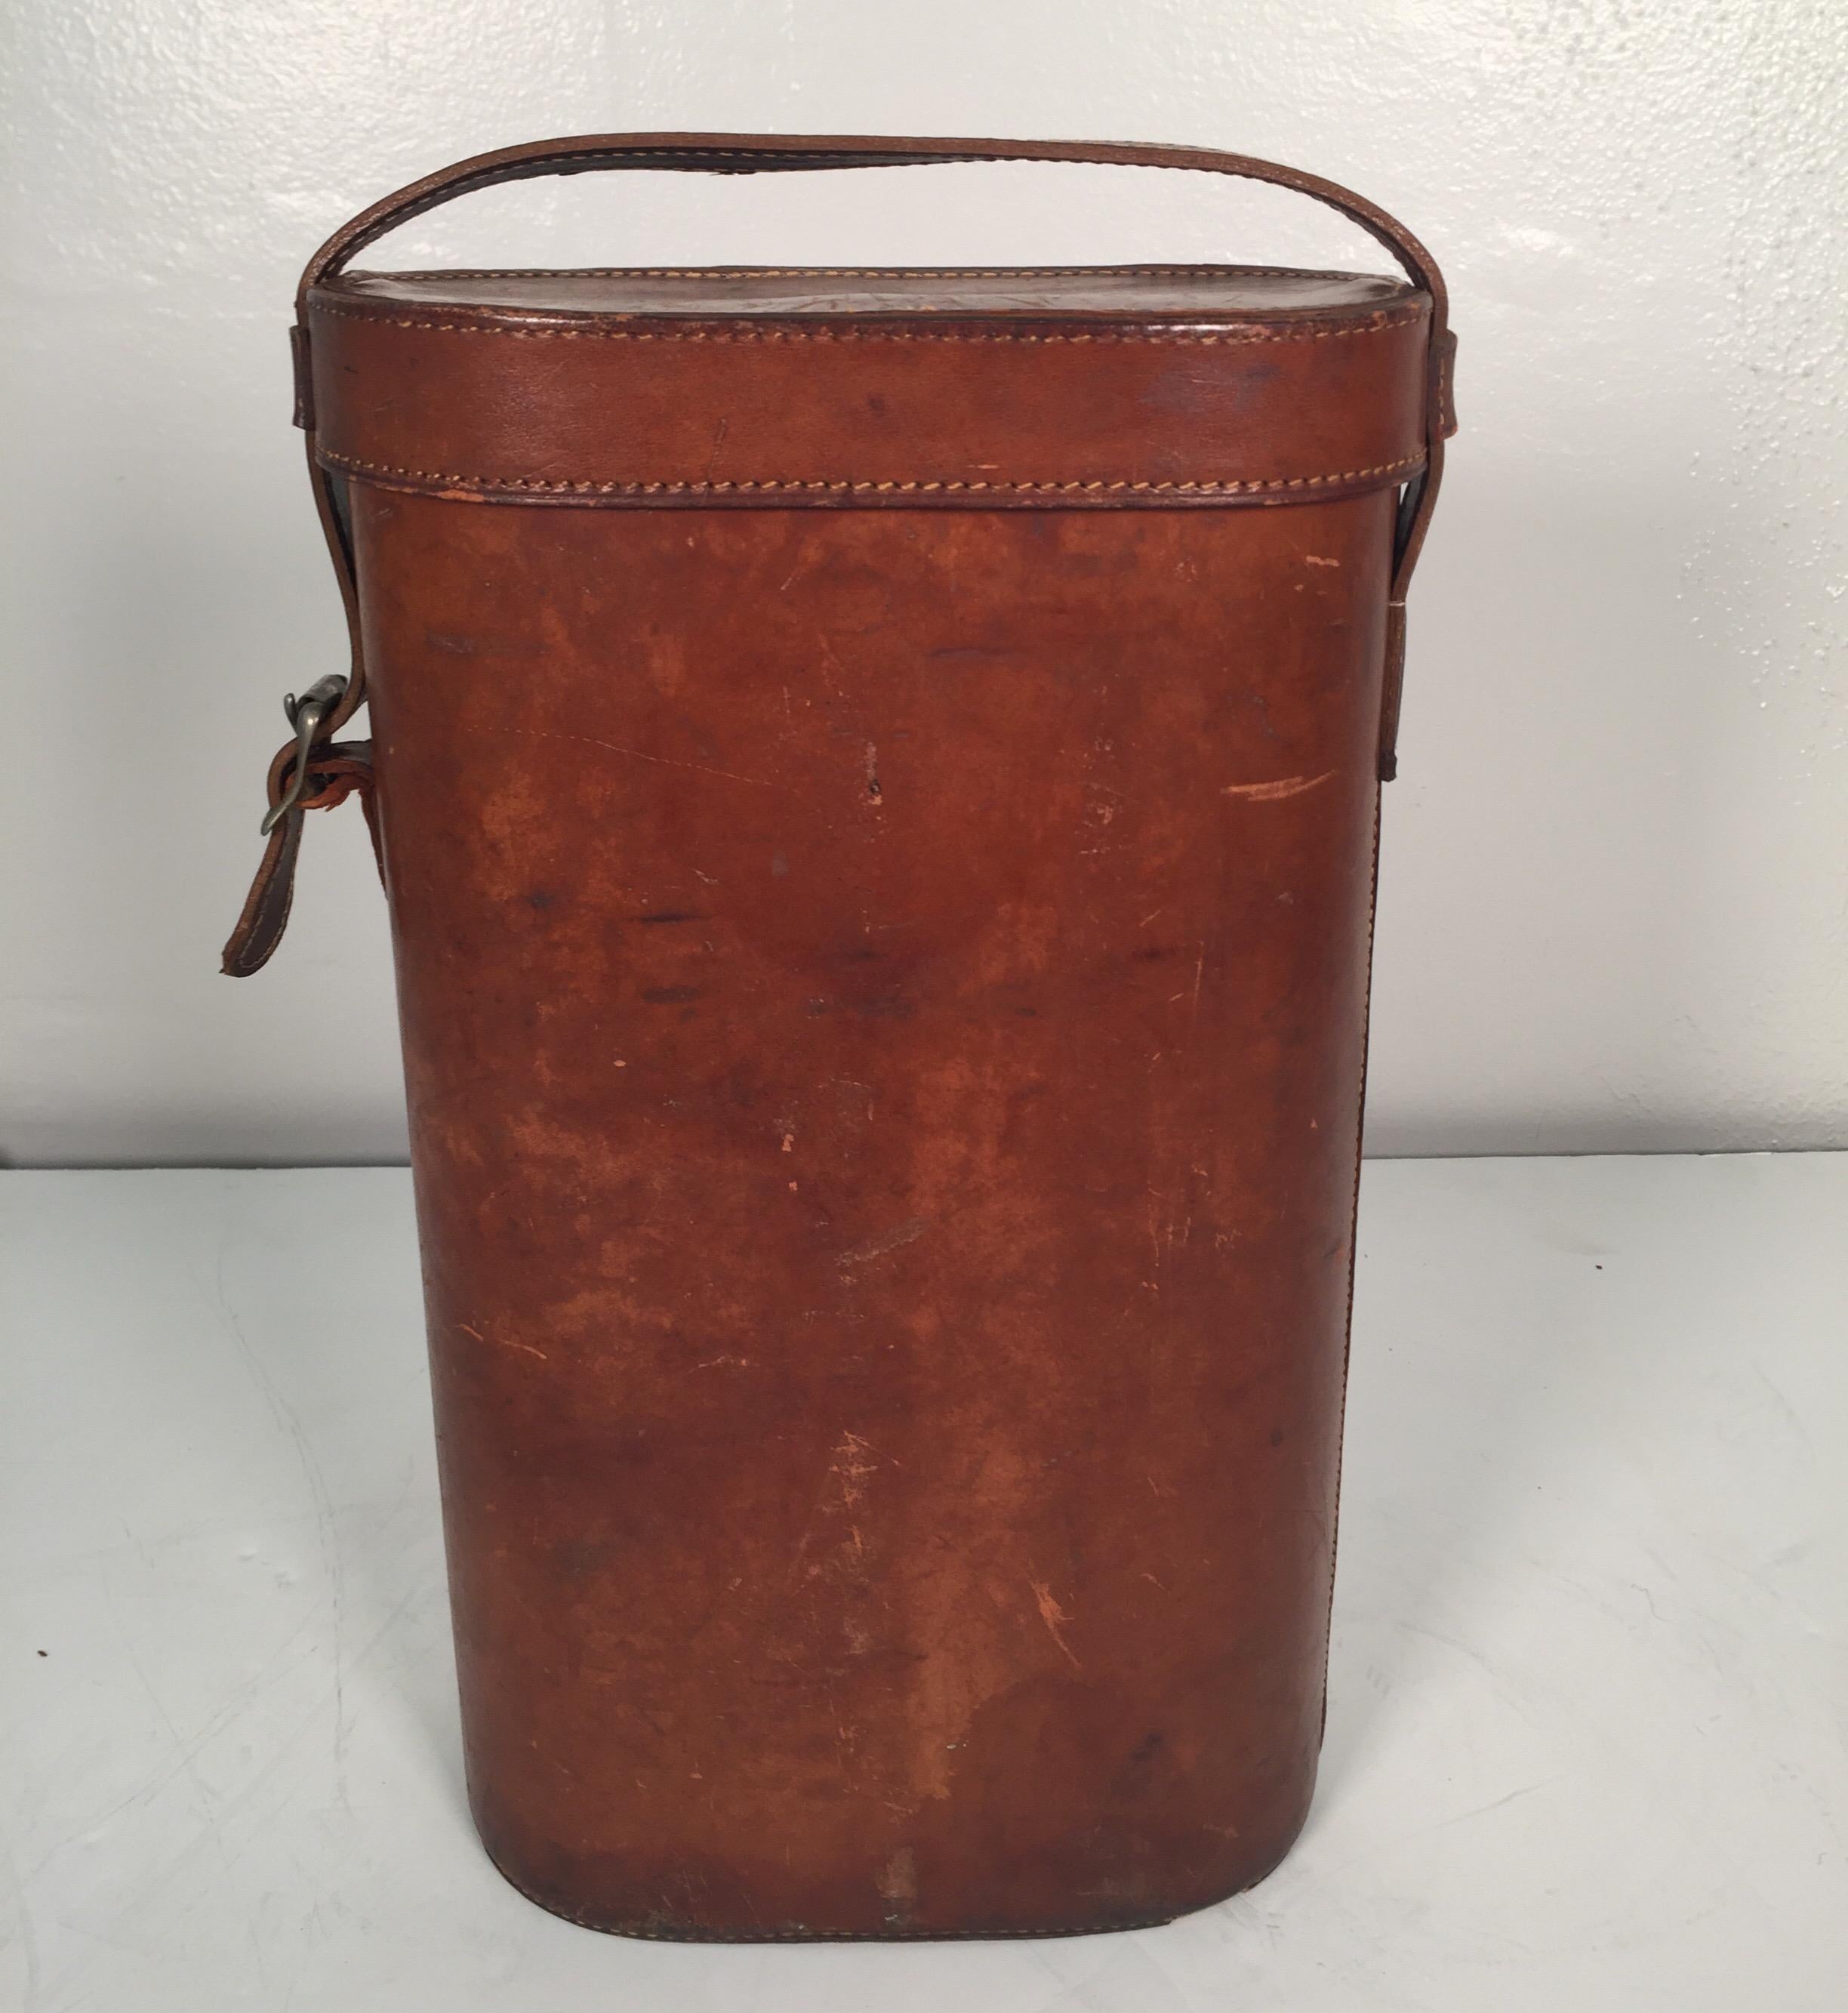 Vintage leather two bottle wine carrier, circa 1940s-1950s, expertly made vintage wine caddy.
A throwback to a more elegant time. The carrier handle has been professionally replaced.
Dimensions: 9.25